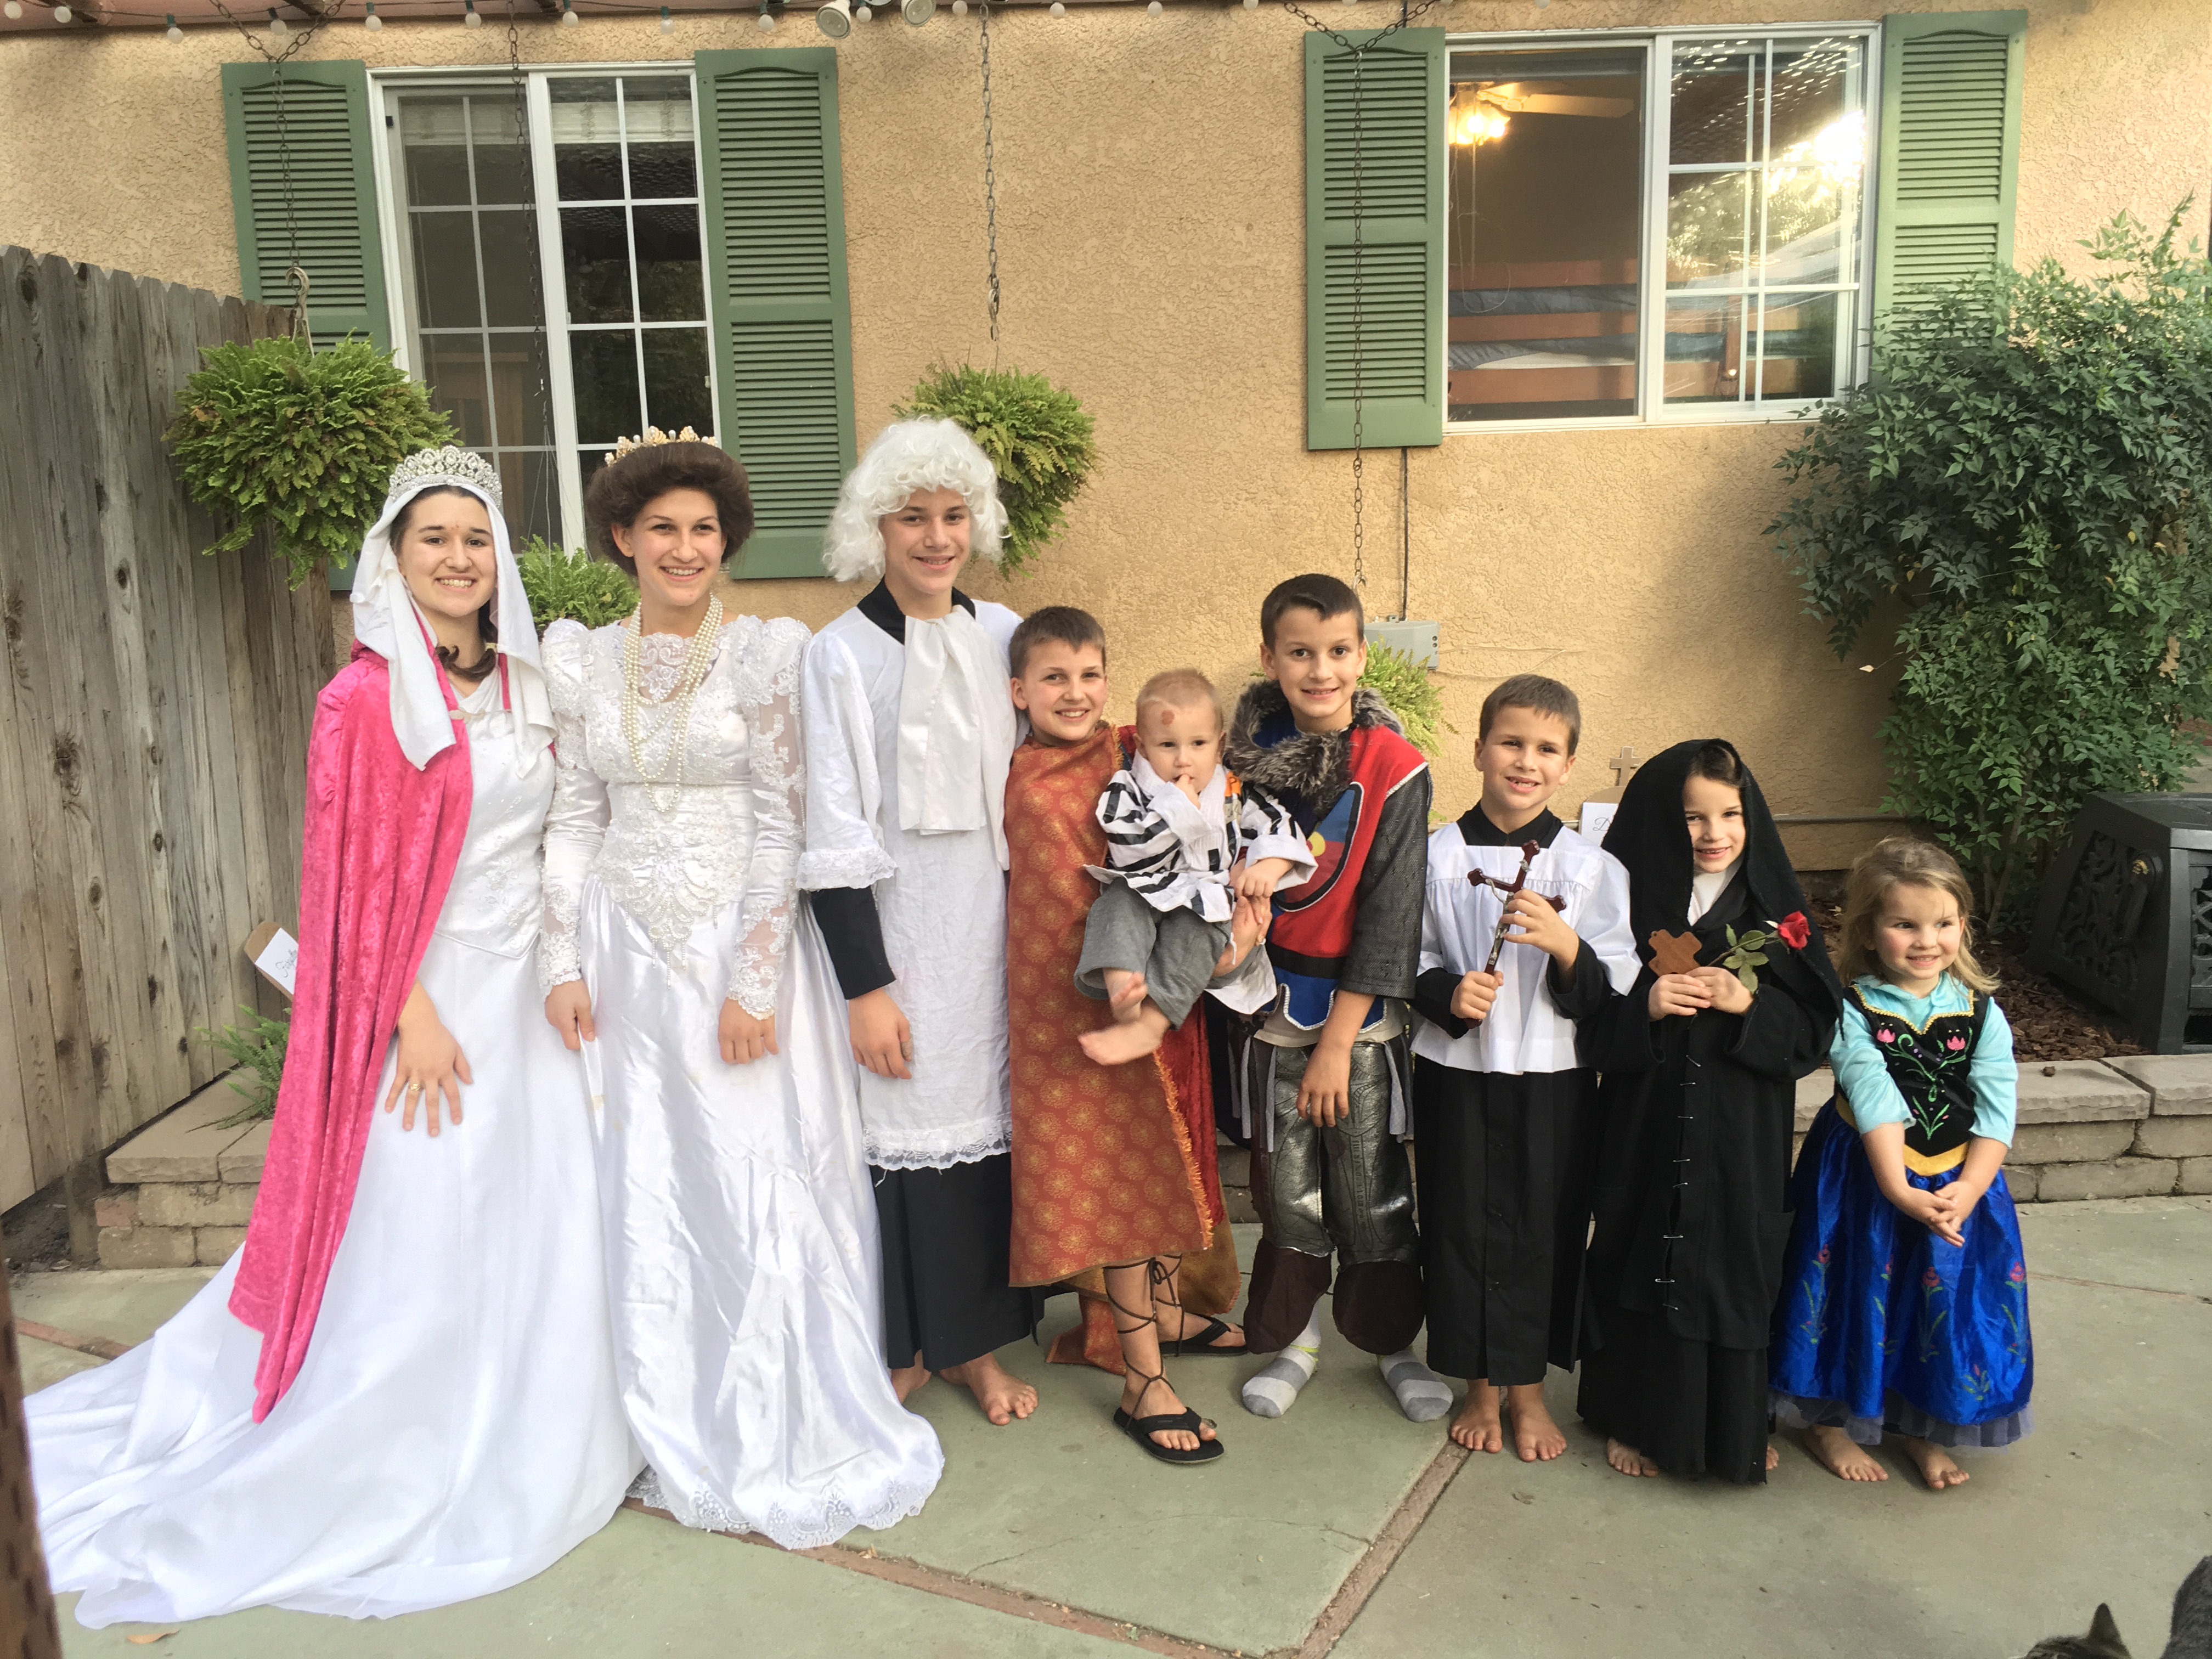 Costumes For All Saints Day